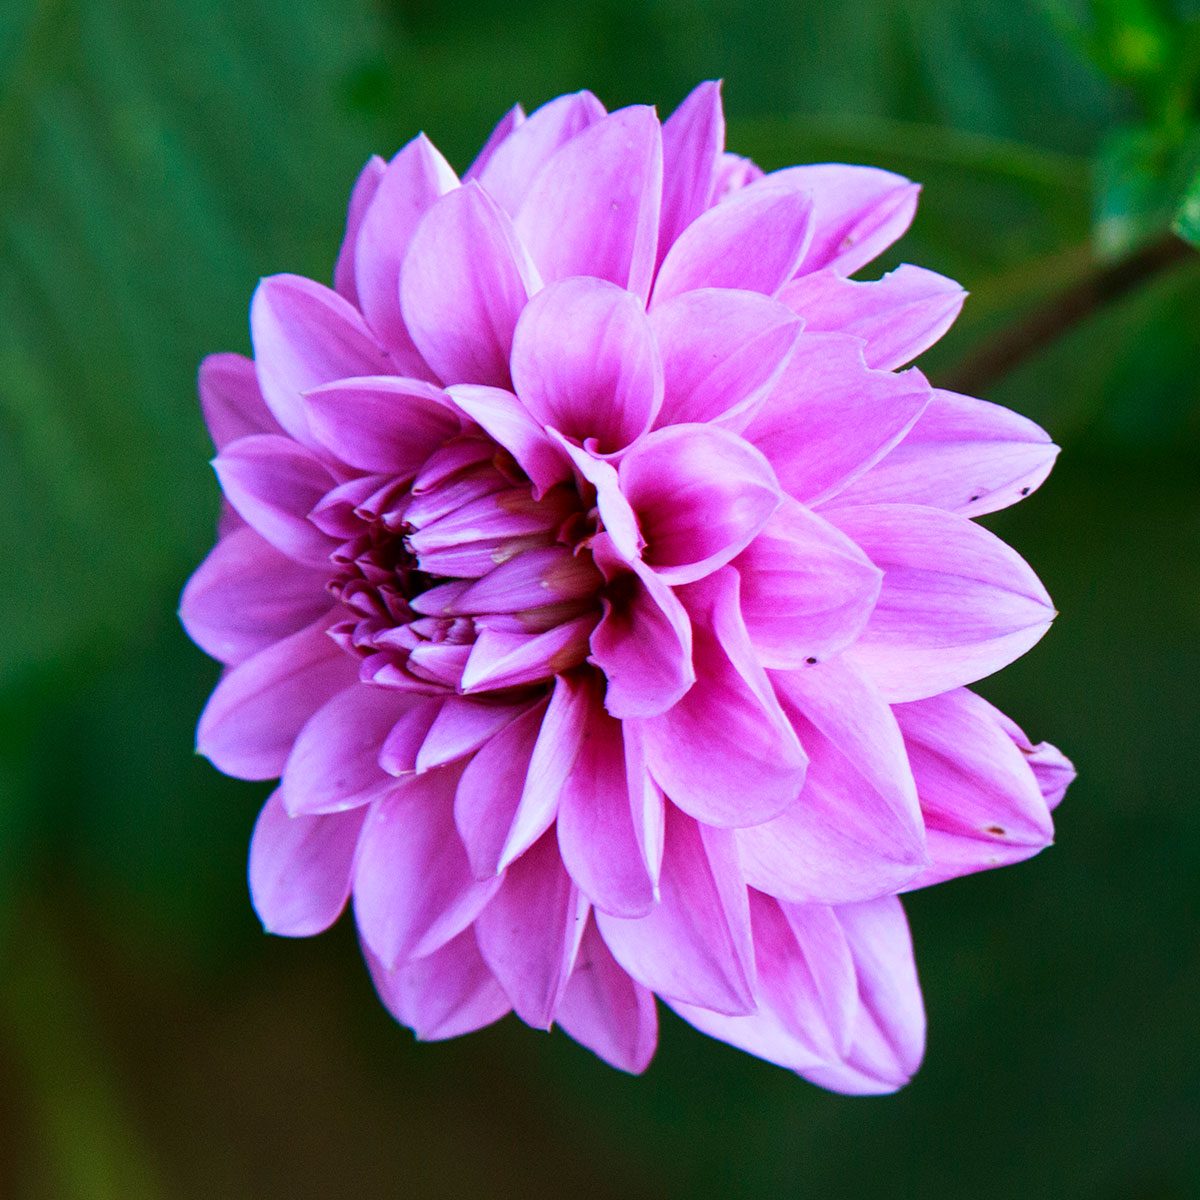 Lavender Dahlia Flower Blooming In The Garden On A Sunny Day.